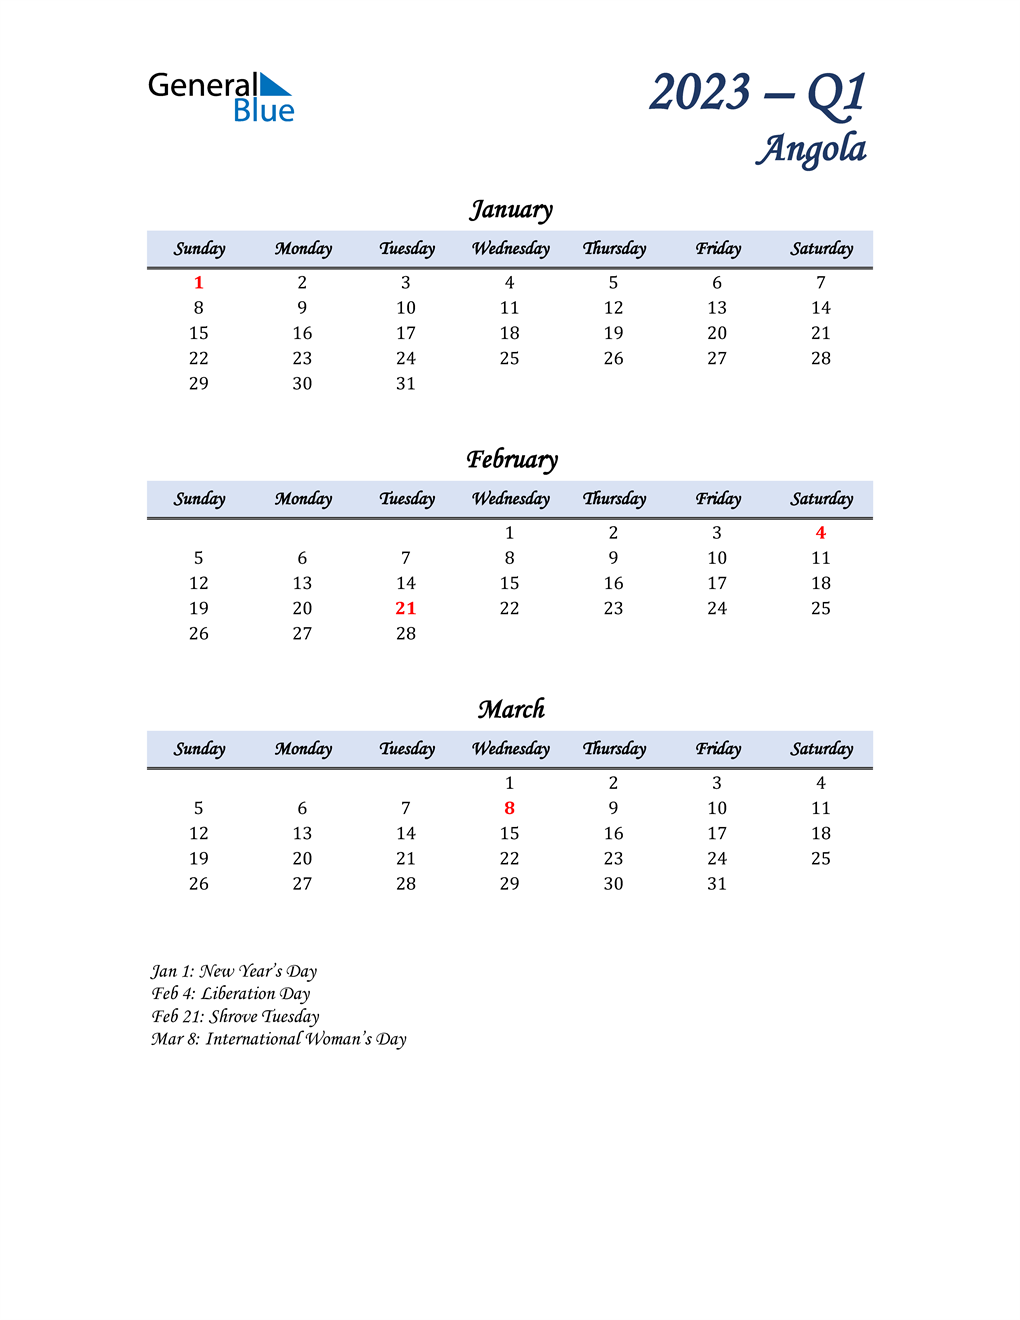  January, February, and March Calendar for Angola